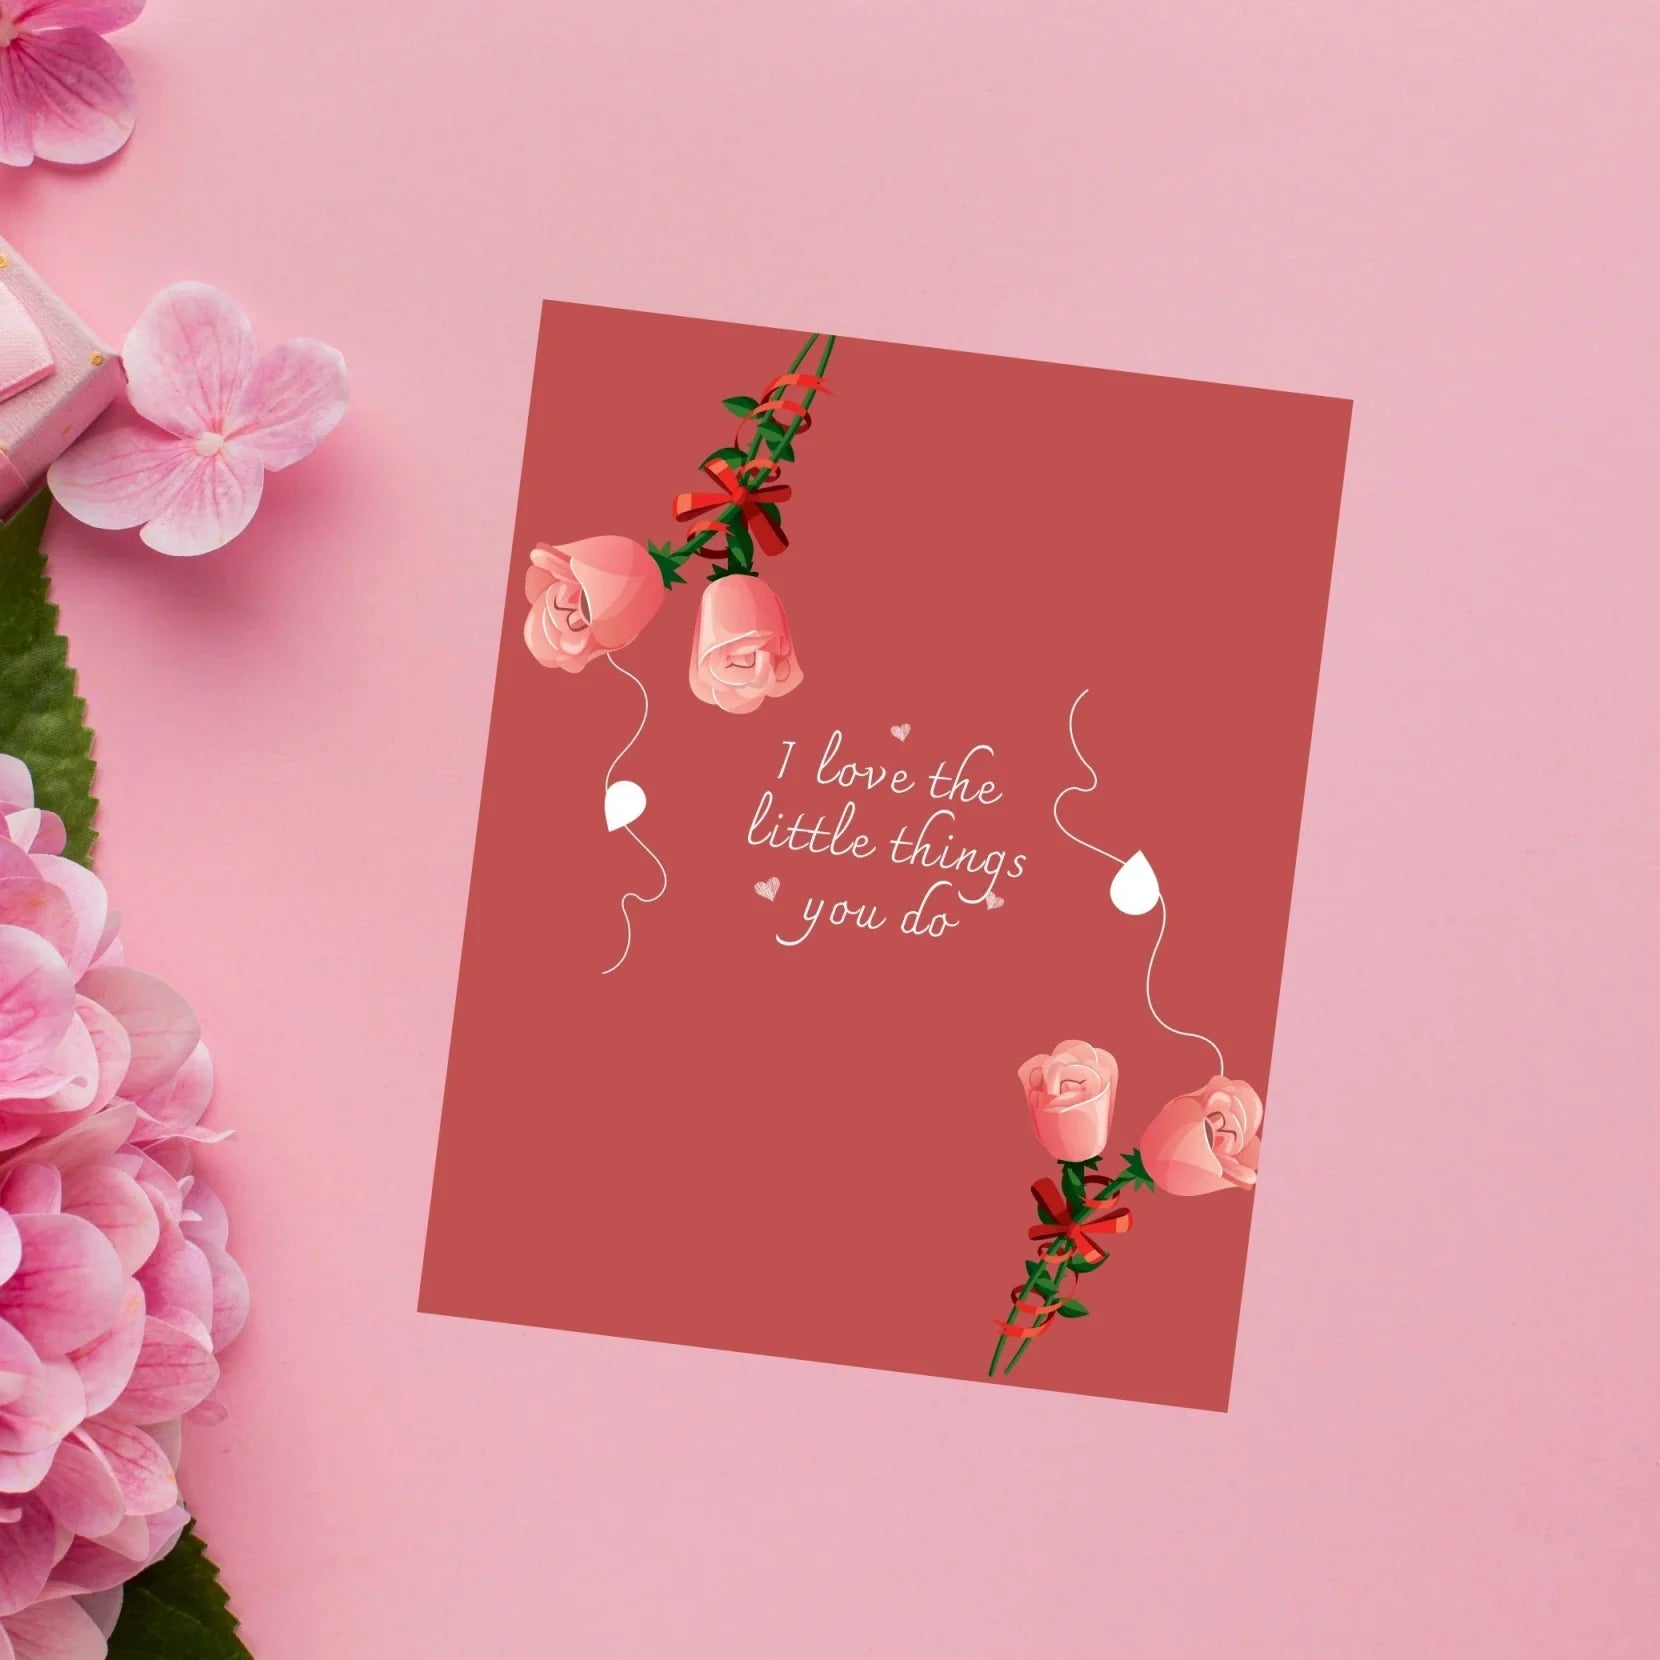 "Share your feelings for your special someone from the core of your heart with a romantic postcard  "